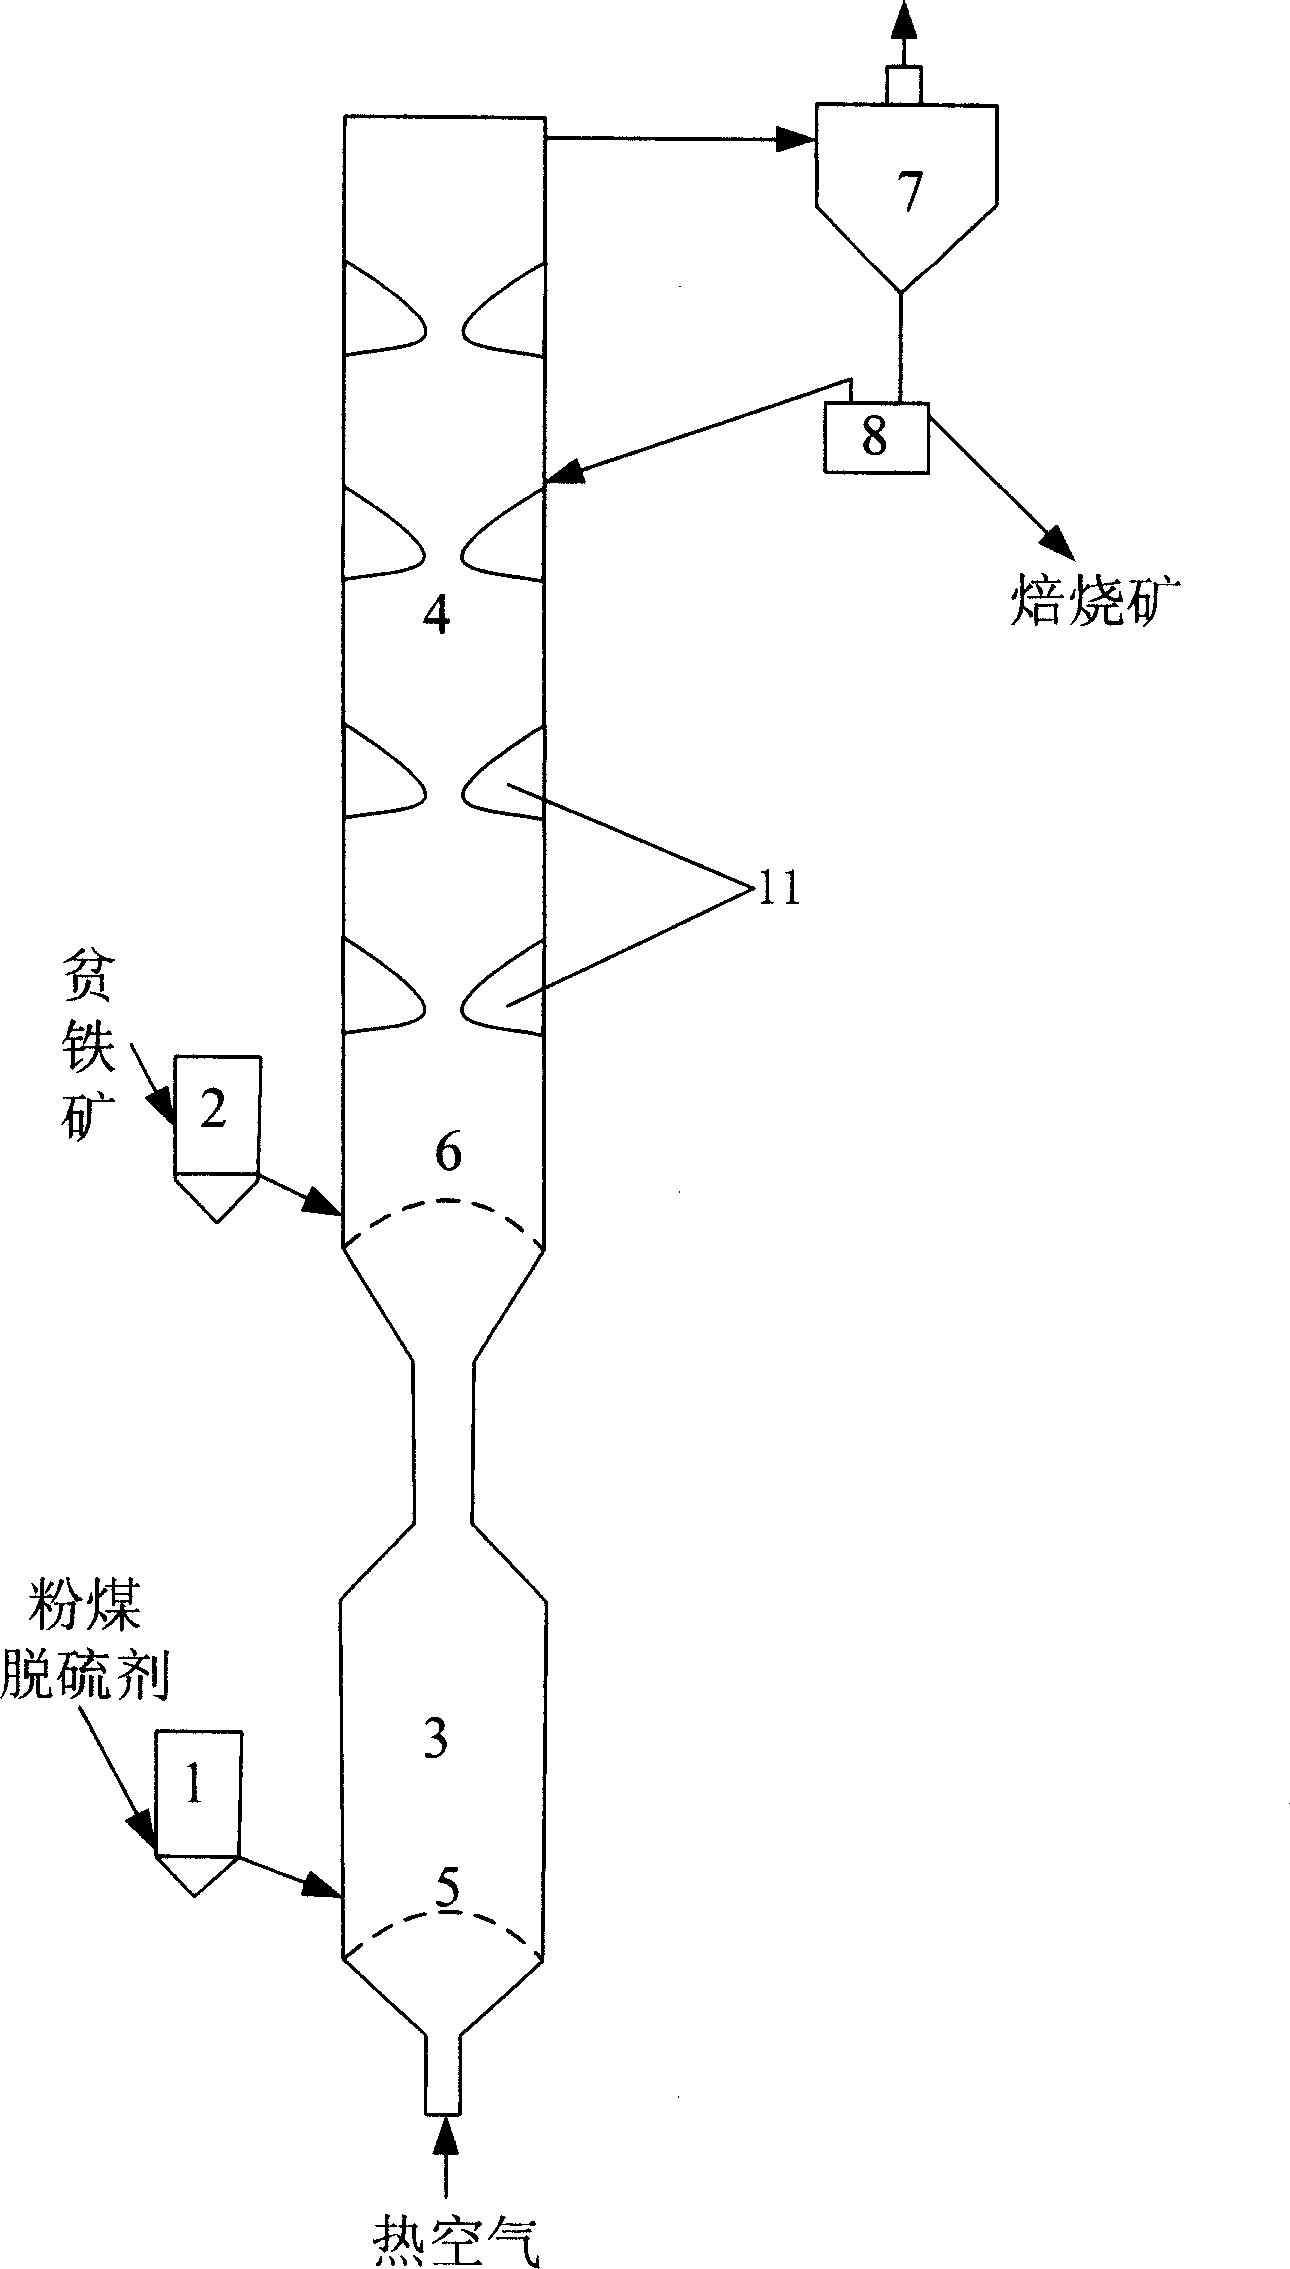 Coal gasification-pore iron ore magnetic roasting coupling technique and device